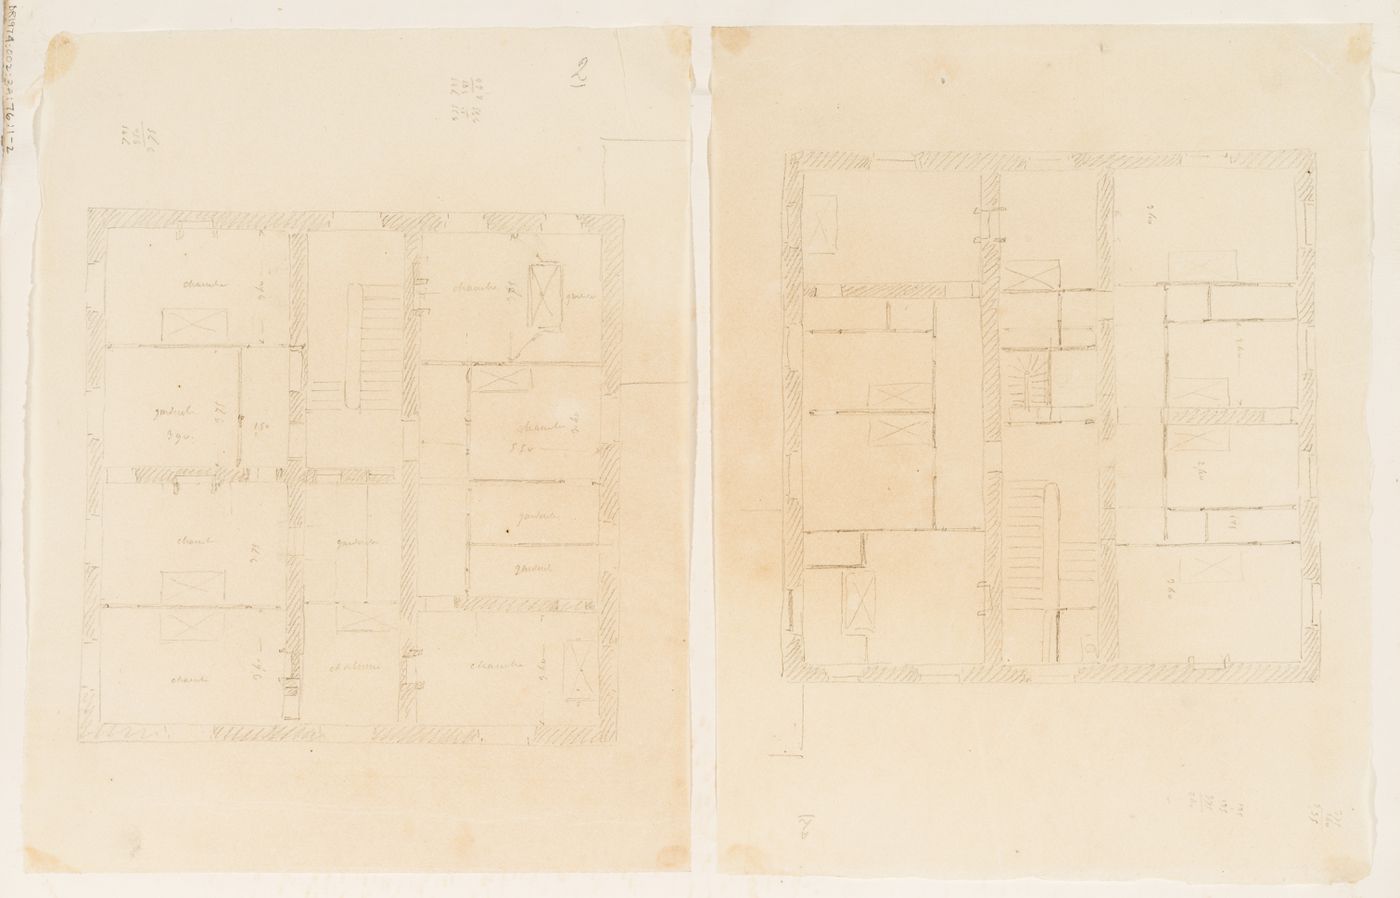 Project no. 10 for a country house for comte Treilhard: Plans